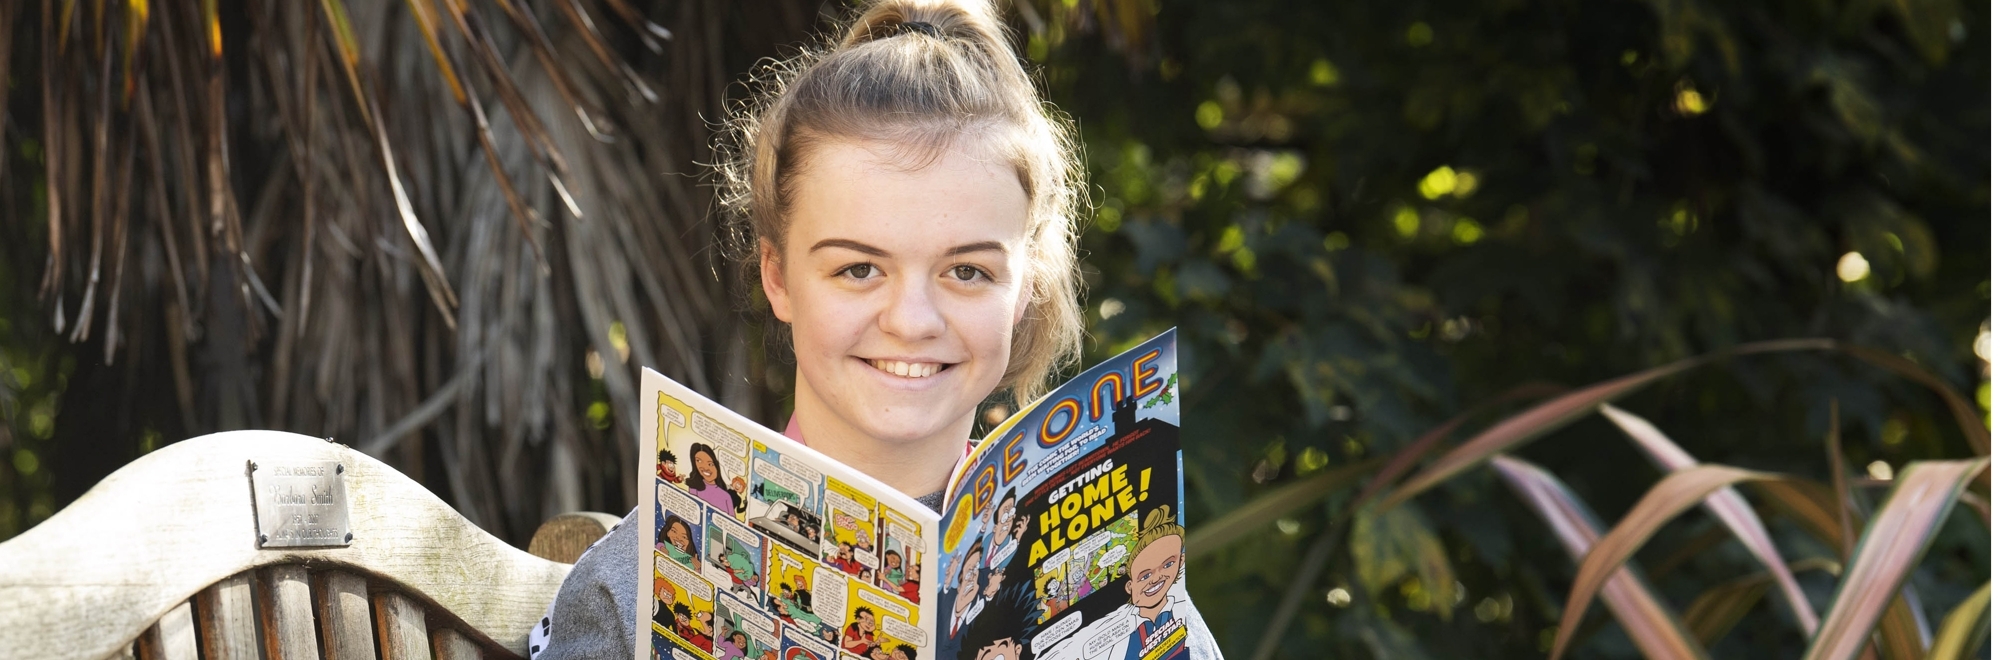 Teenage sporting heroes are honoured in this year’s special Beano collectible issue